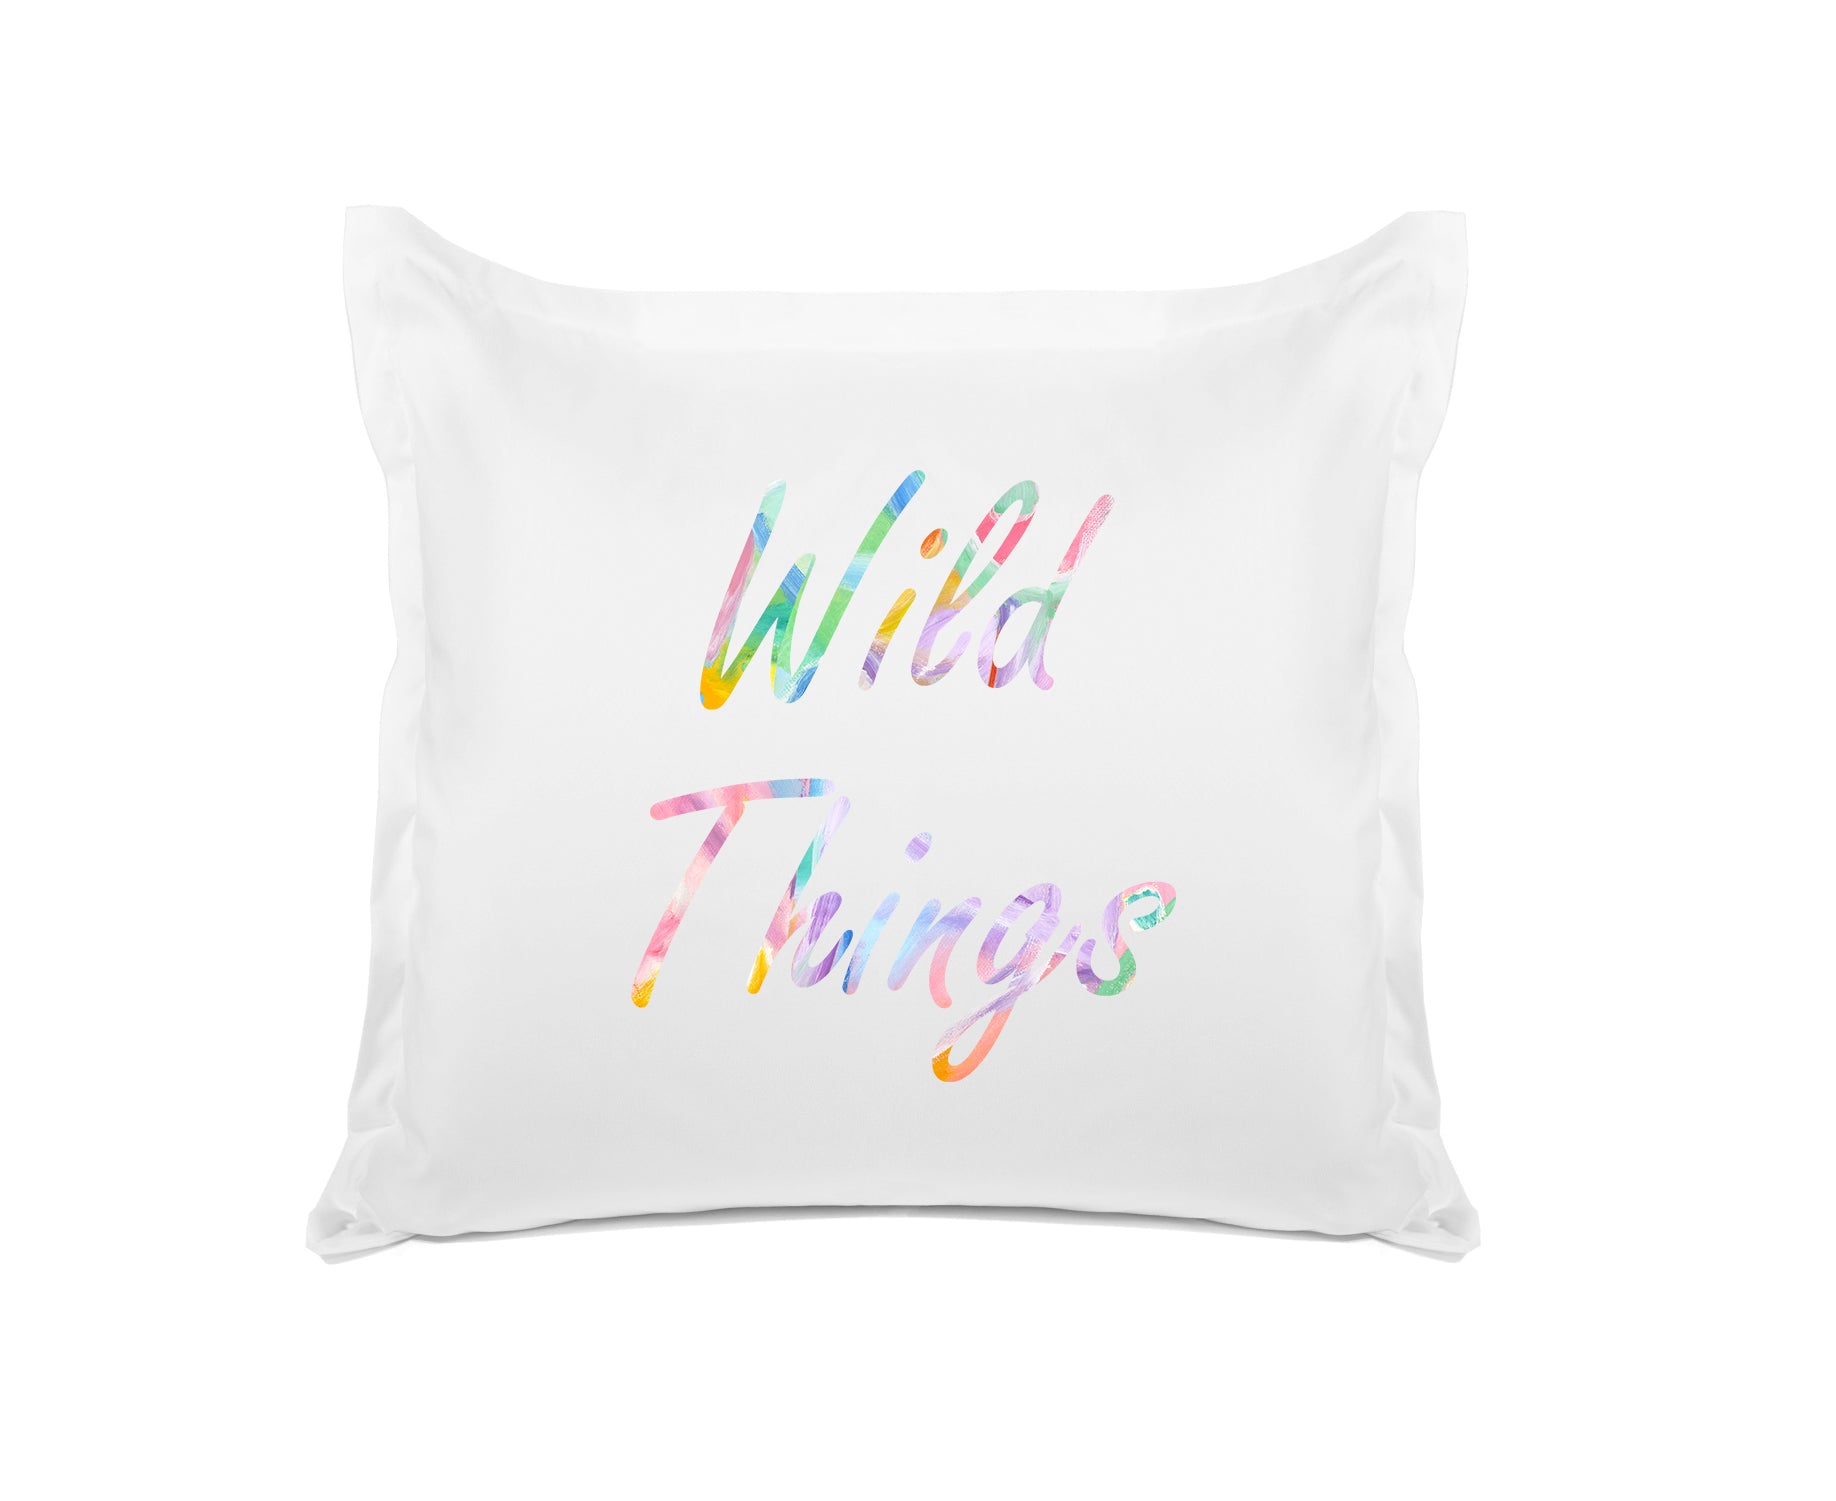 Wild Things - Inspirational Quotes Pillowcase Collection-Di Lewis